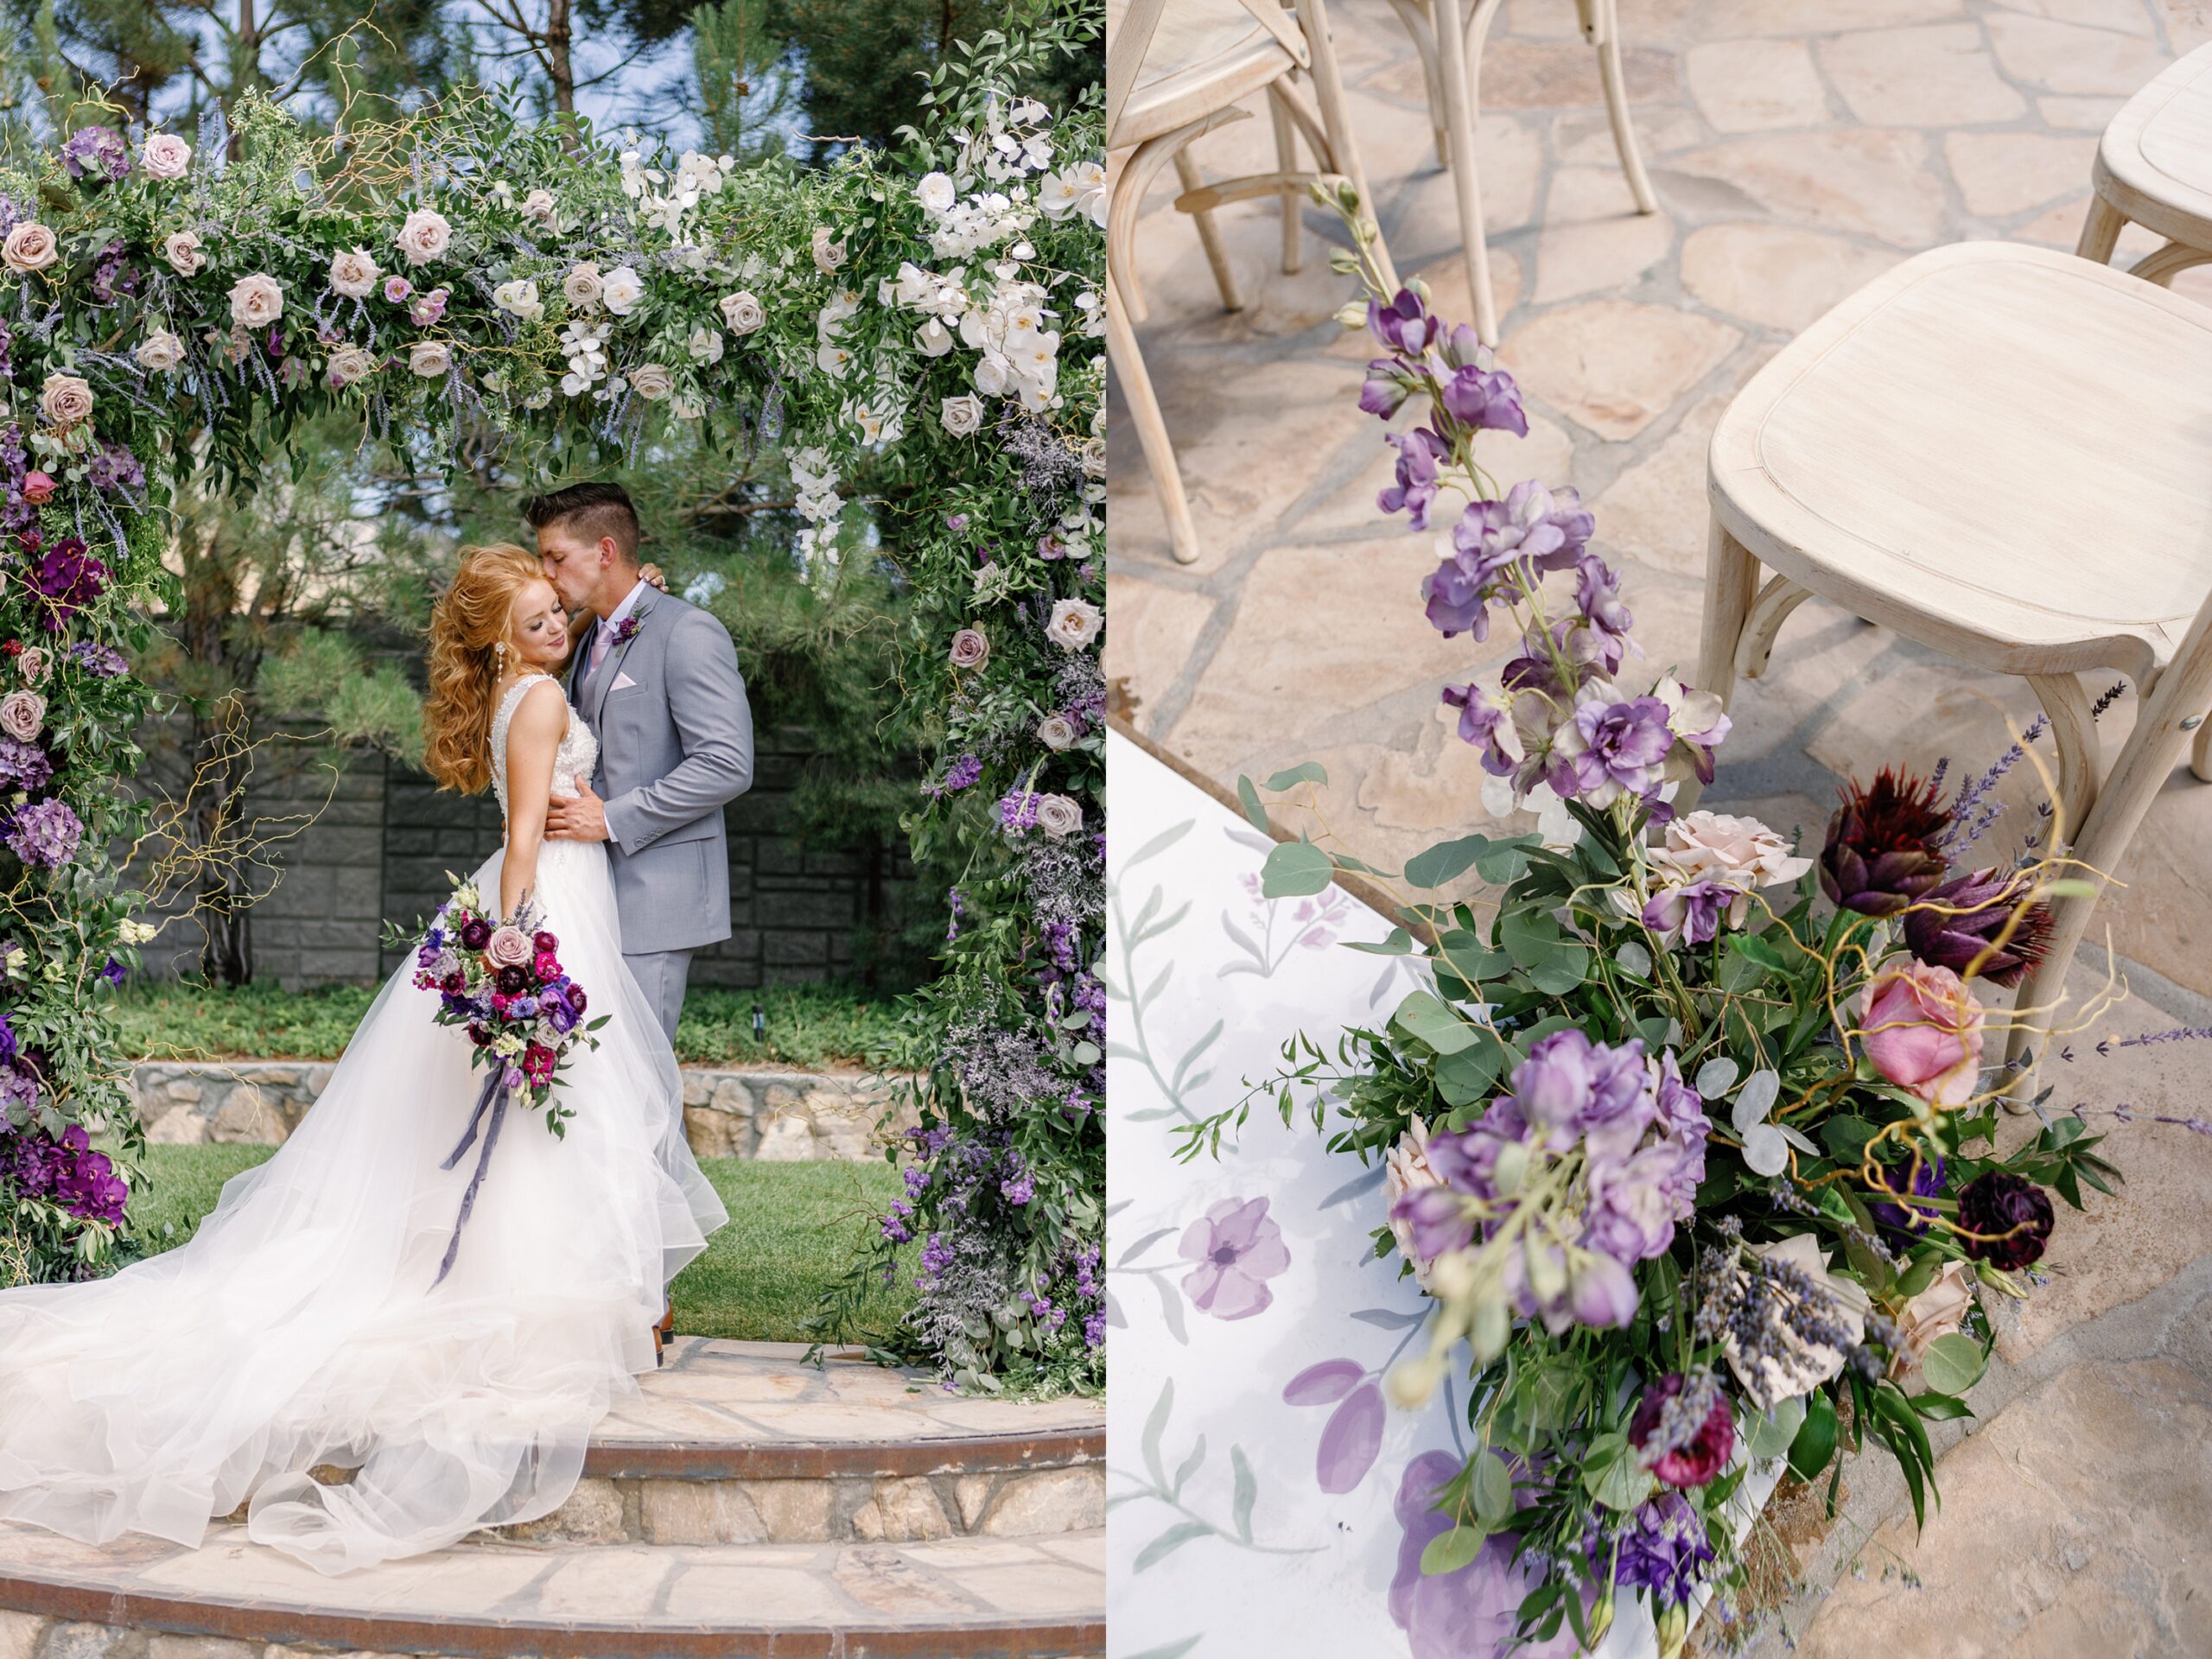 Las Vegas Wedding Florist designs the most beautiful lavender colored full floral arch and ground pieces